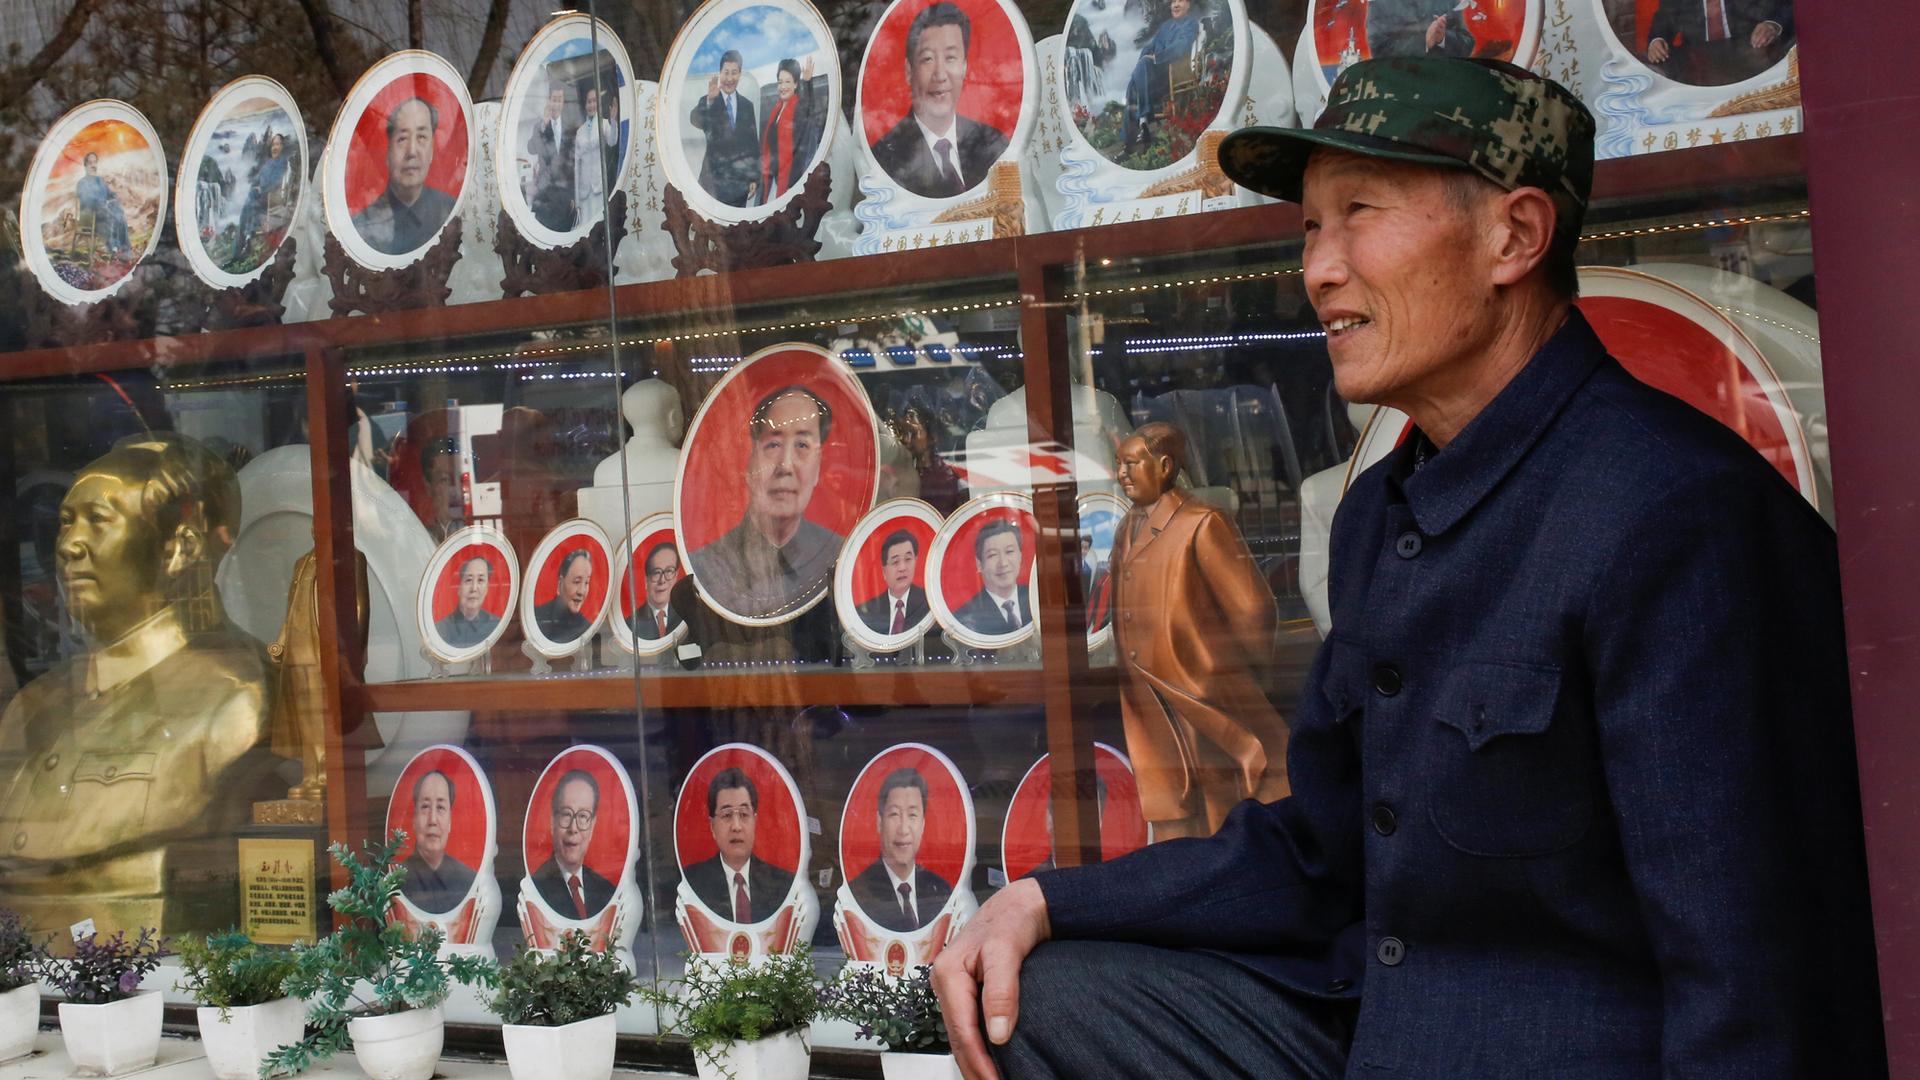 A man poses for pictures in front of souvenir plates featuring portraits of former and current Chinese leaders including President Xi Jinping and the late Chairman Mao Zedong in Tiananmen Square in Beijing, Feb. 26, 2018.